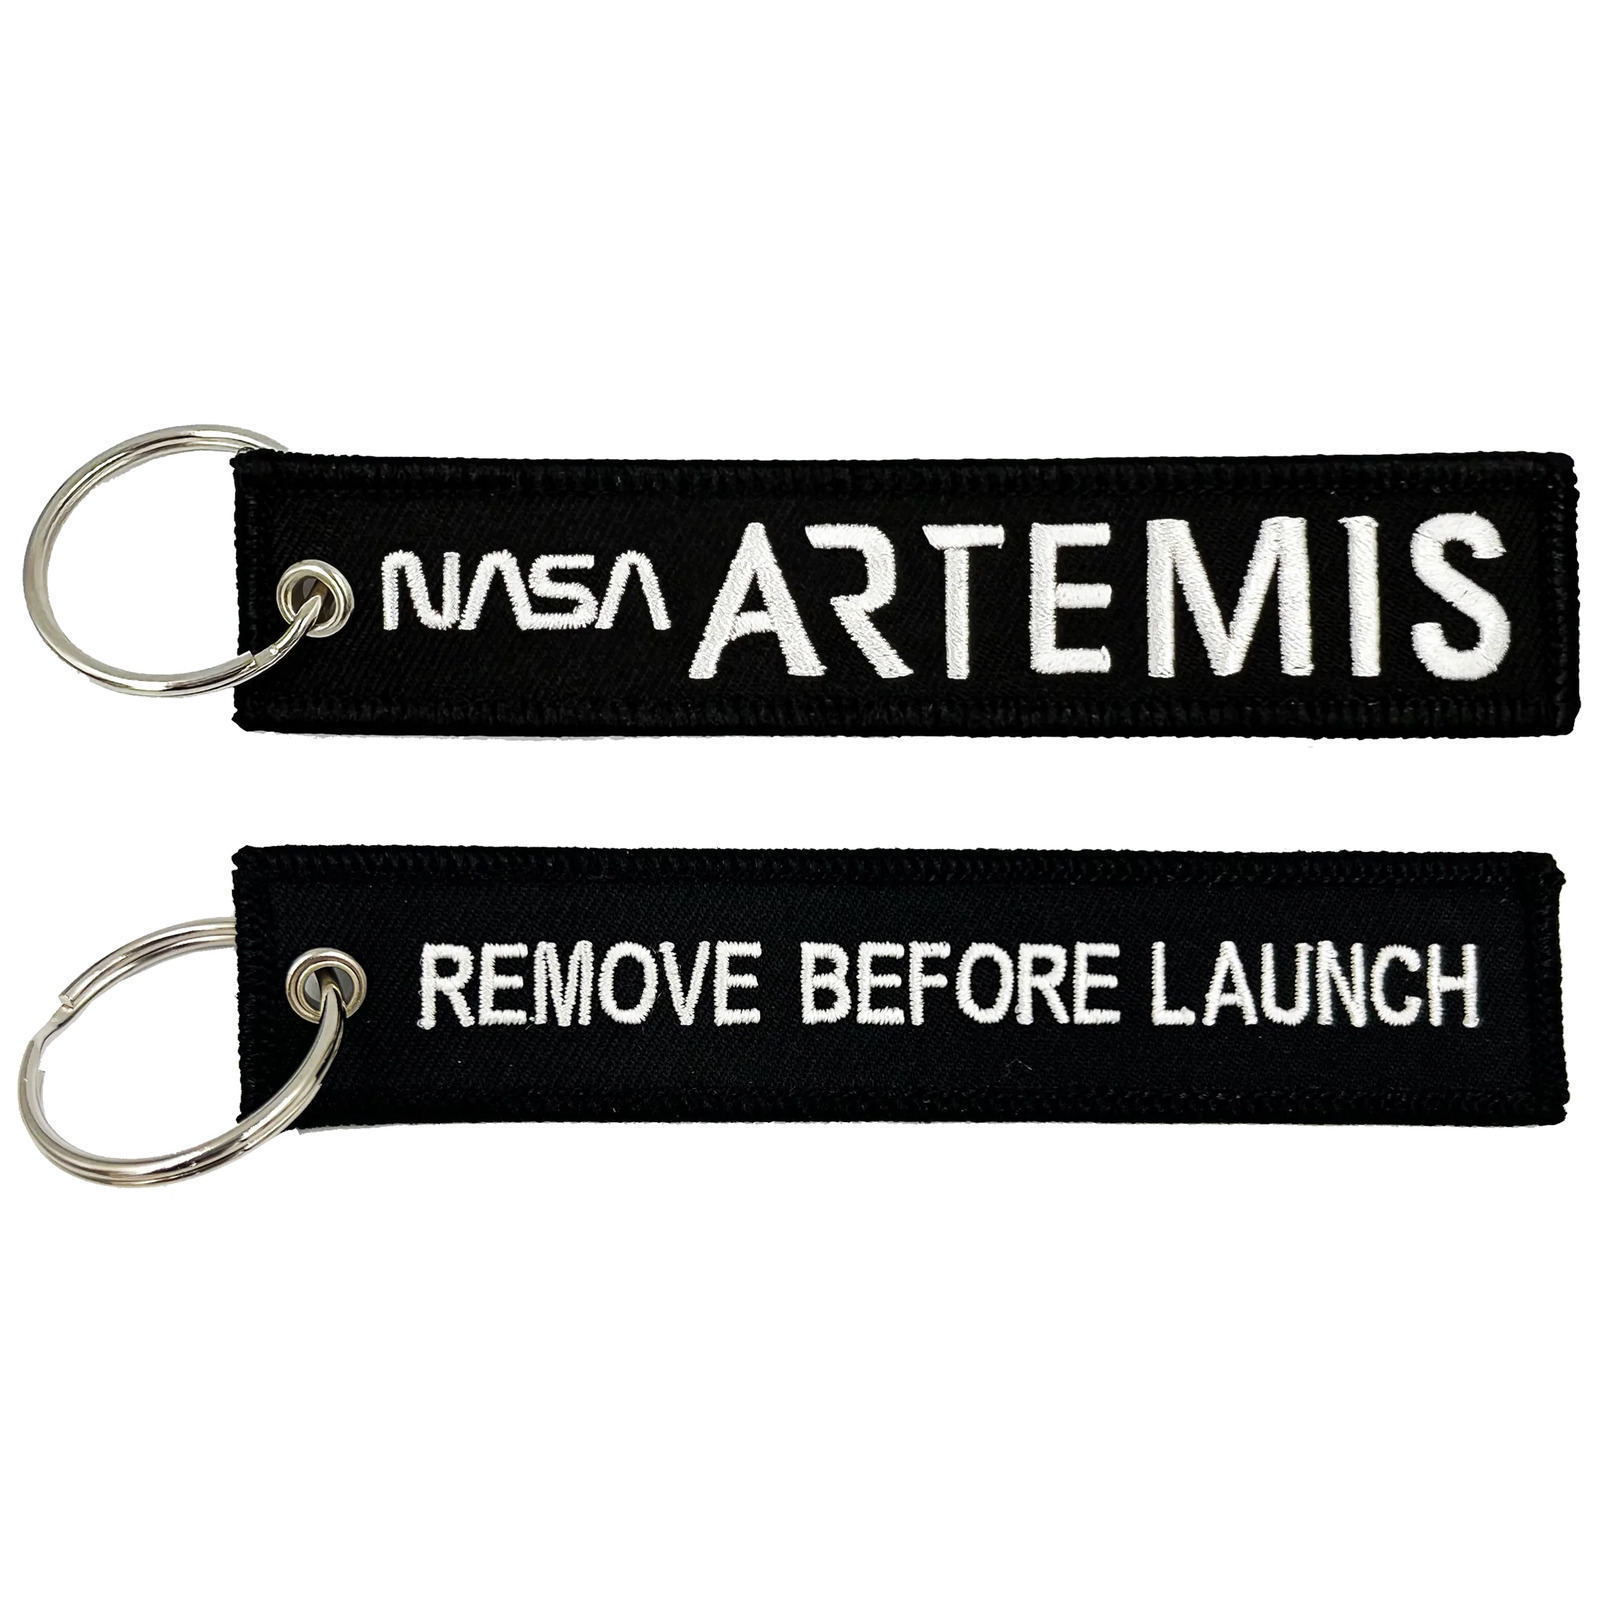 BL16-004 NASA Artemis Shuttle Launch Keychain or Luggage Tag or zipper pull